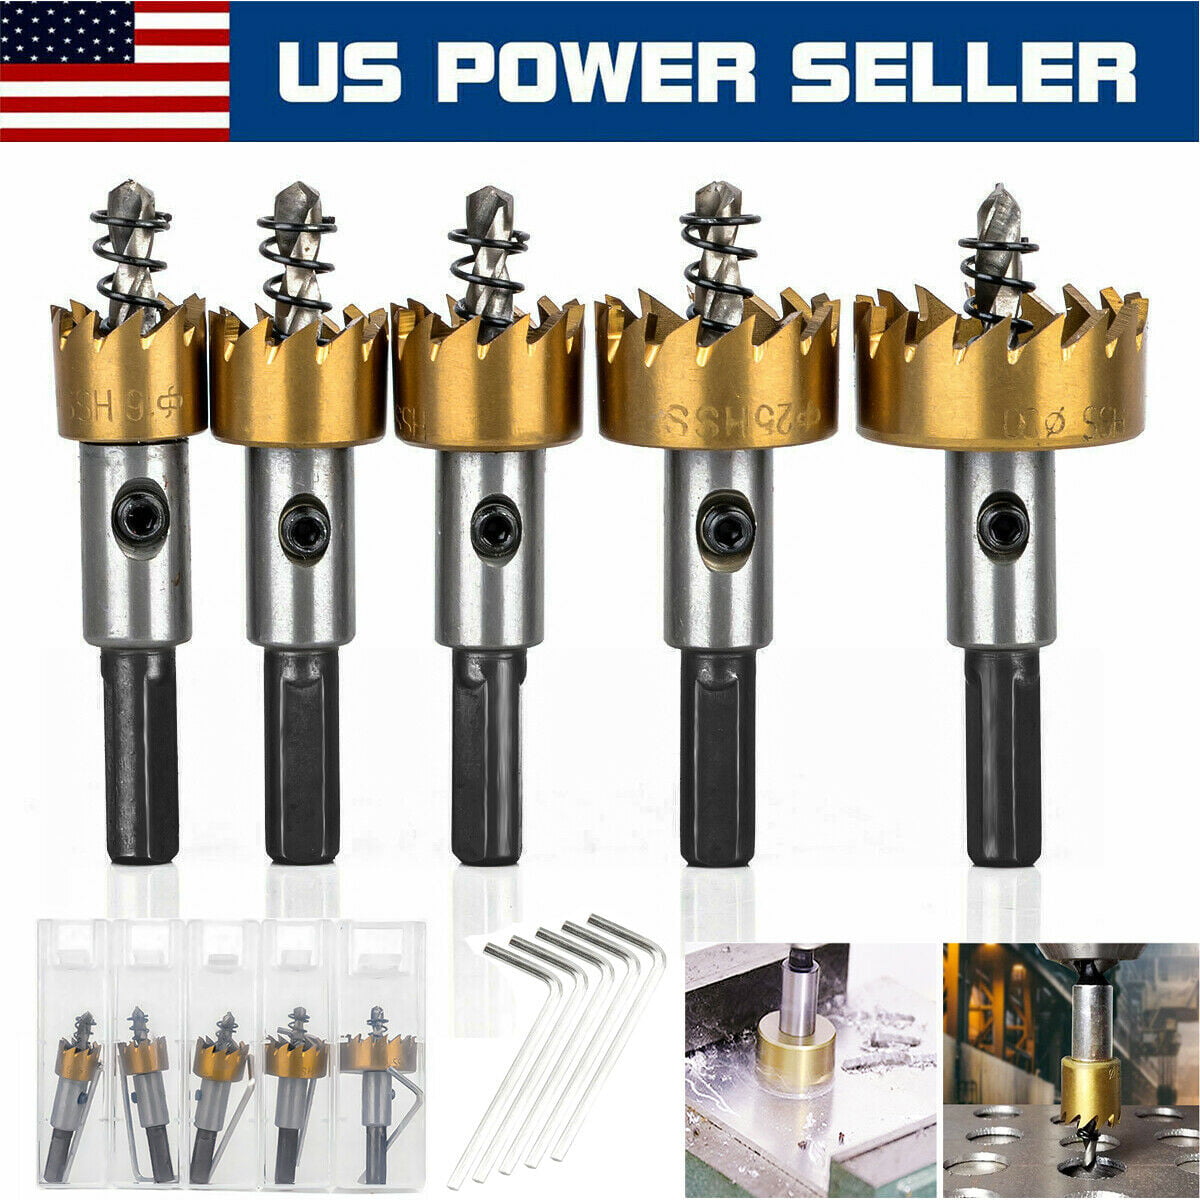 5pcs Carbide Tip Drill Bits Set For Metal Wood Tile Hole Drilling Cutting Tools 